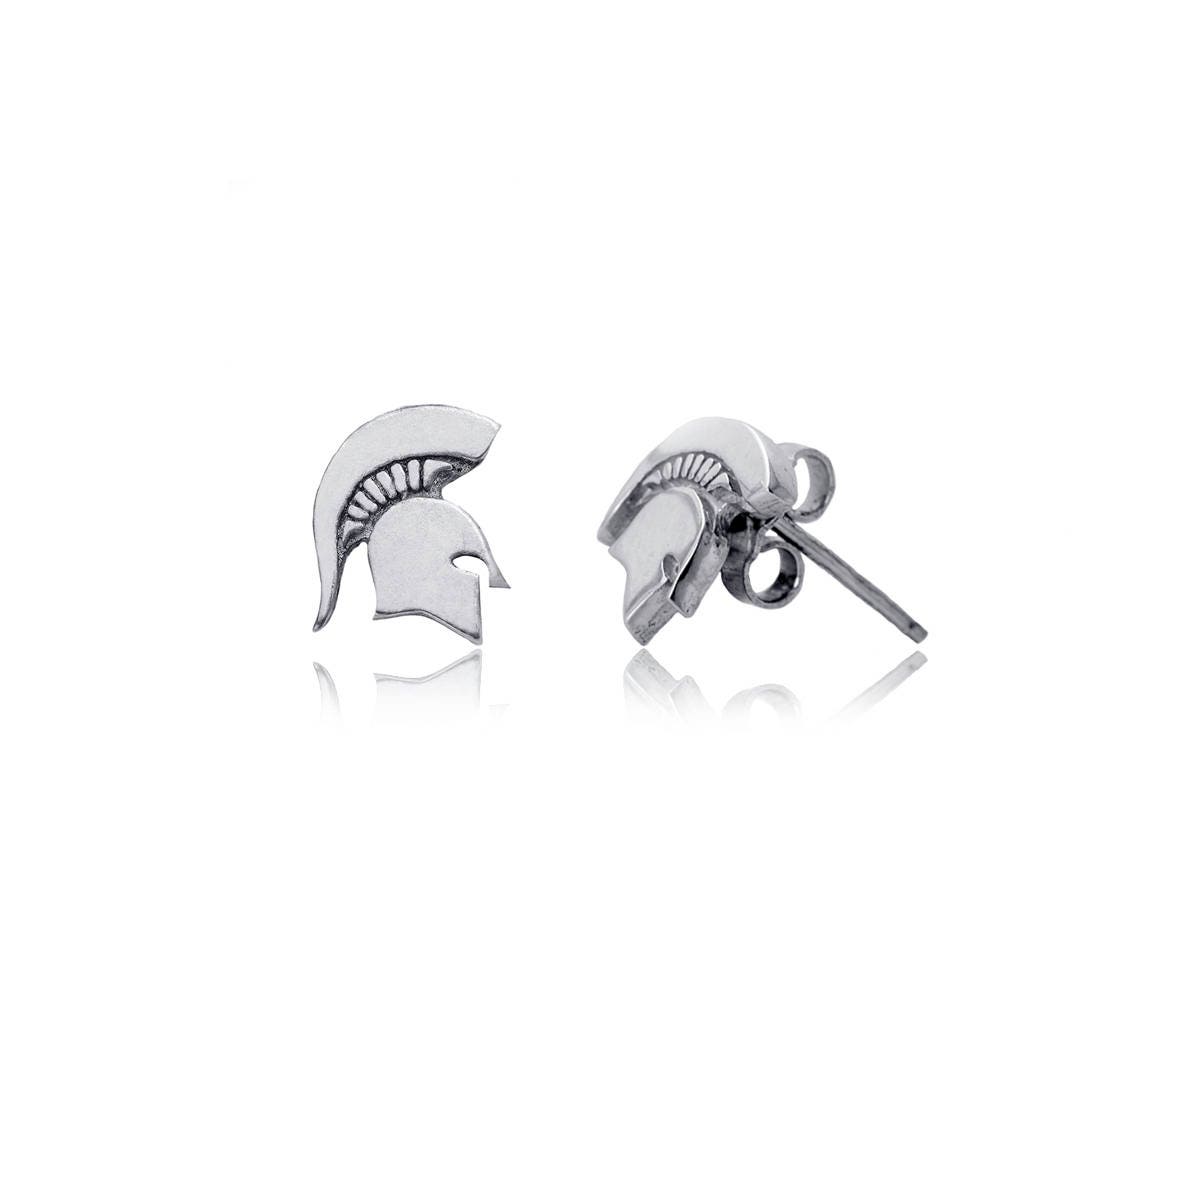 Michigan State Post Stud Earrings Spartans Silver Jewelry